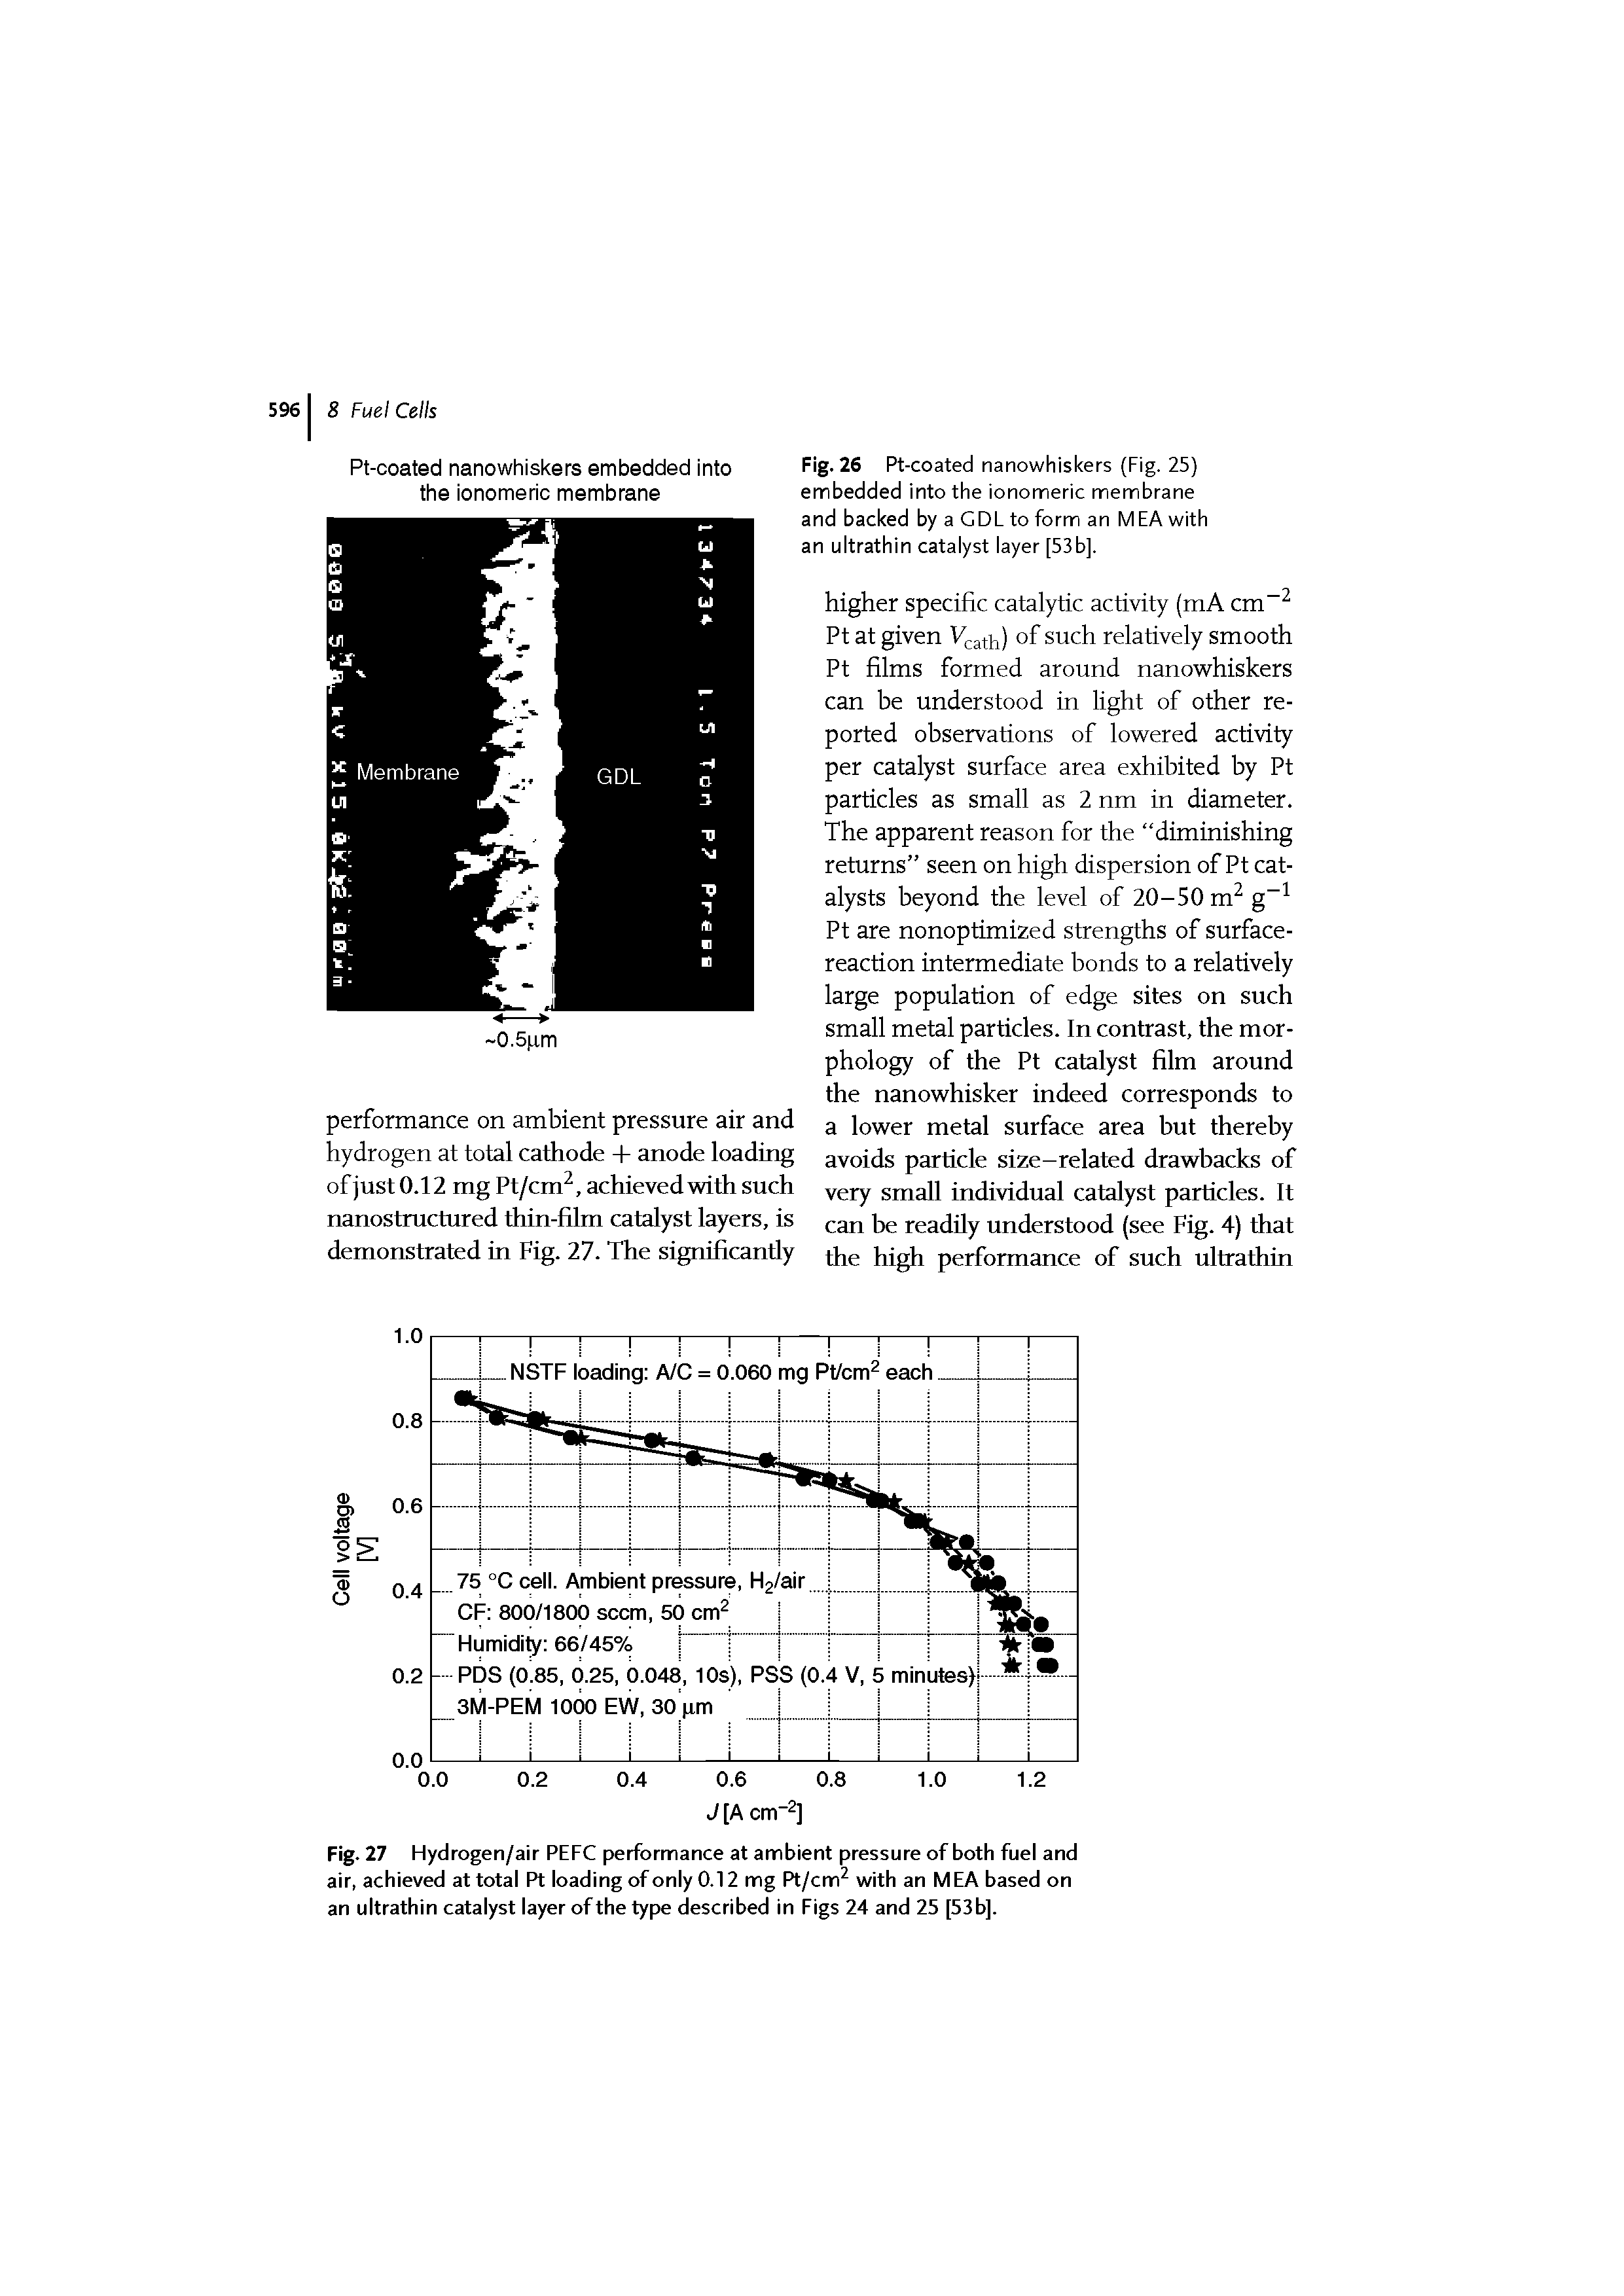 Fig. 27 Hydrogen/air PEFC performance at ambient pressure of both fuel and air, achieved at total Pt loading of only 0.12 mg Pt/cm2 with an MEA based on an ultrathin catalyst layer of the type described in Figs 24 and 25 [53b].